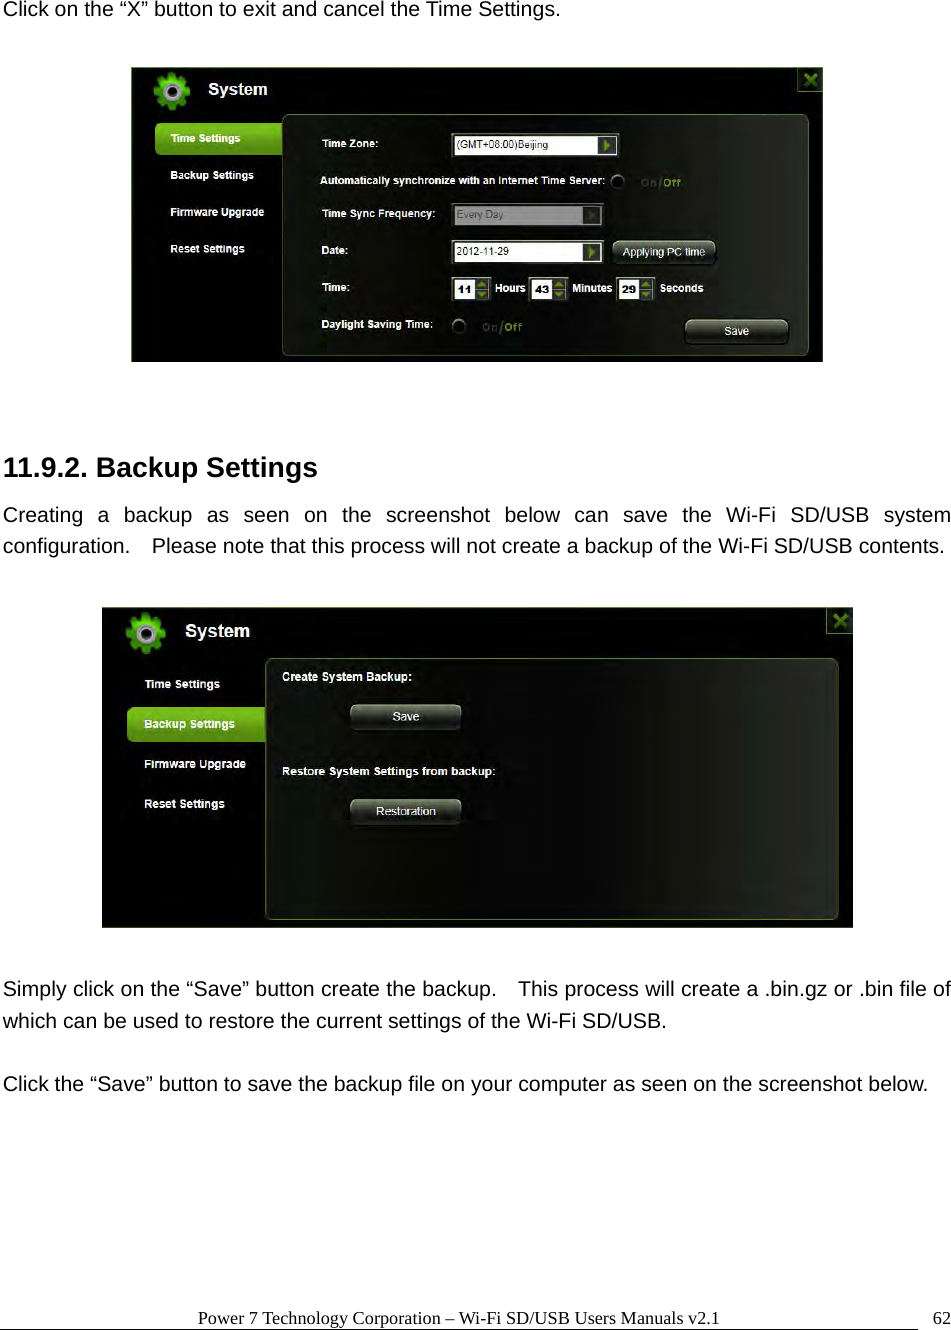 Power 7 Technology Corporation – Wi-Fi SD/USB Users Manuals v2.1  62Click on the “X” button to exit and cancel the Time Settings.    11.9.2. Backup Settings Creating a backup as seen on the screenshot below can save the Wi-Fi SD/USB system configuration.    Please note that this process will not create a backup of the Wi-Fi SD/USB contents.    Simply click on the “Save” button create the backup.    This process will create a .bin.gz or .bin file of which can be used to restore the current settings of the Wi-Fi SD/USB.  Click the “Save” button to save the backup file on your computer as seen on the screenshot below.  